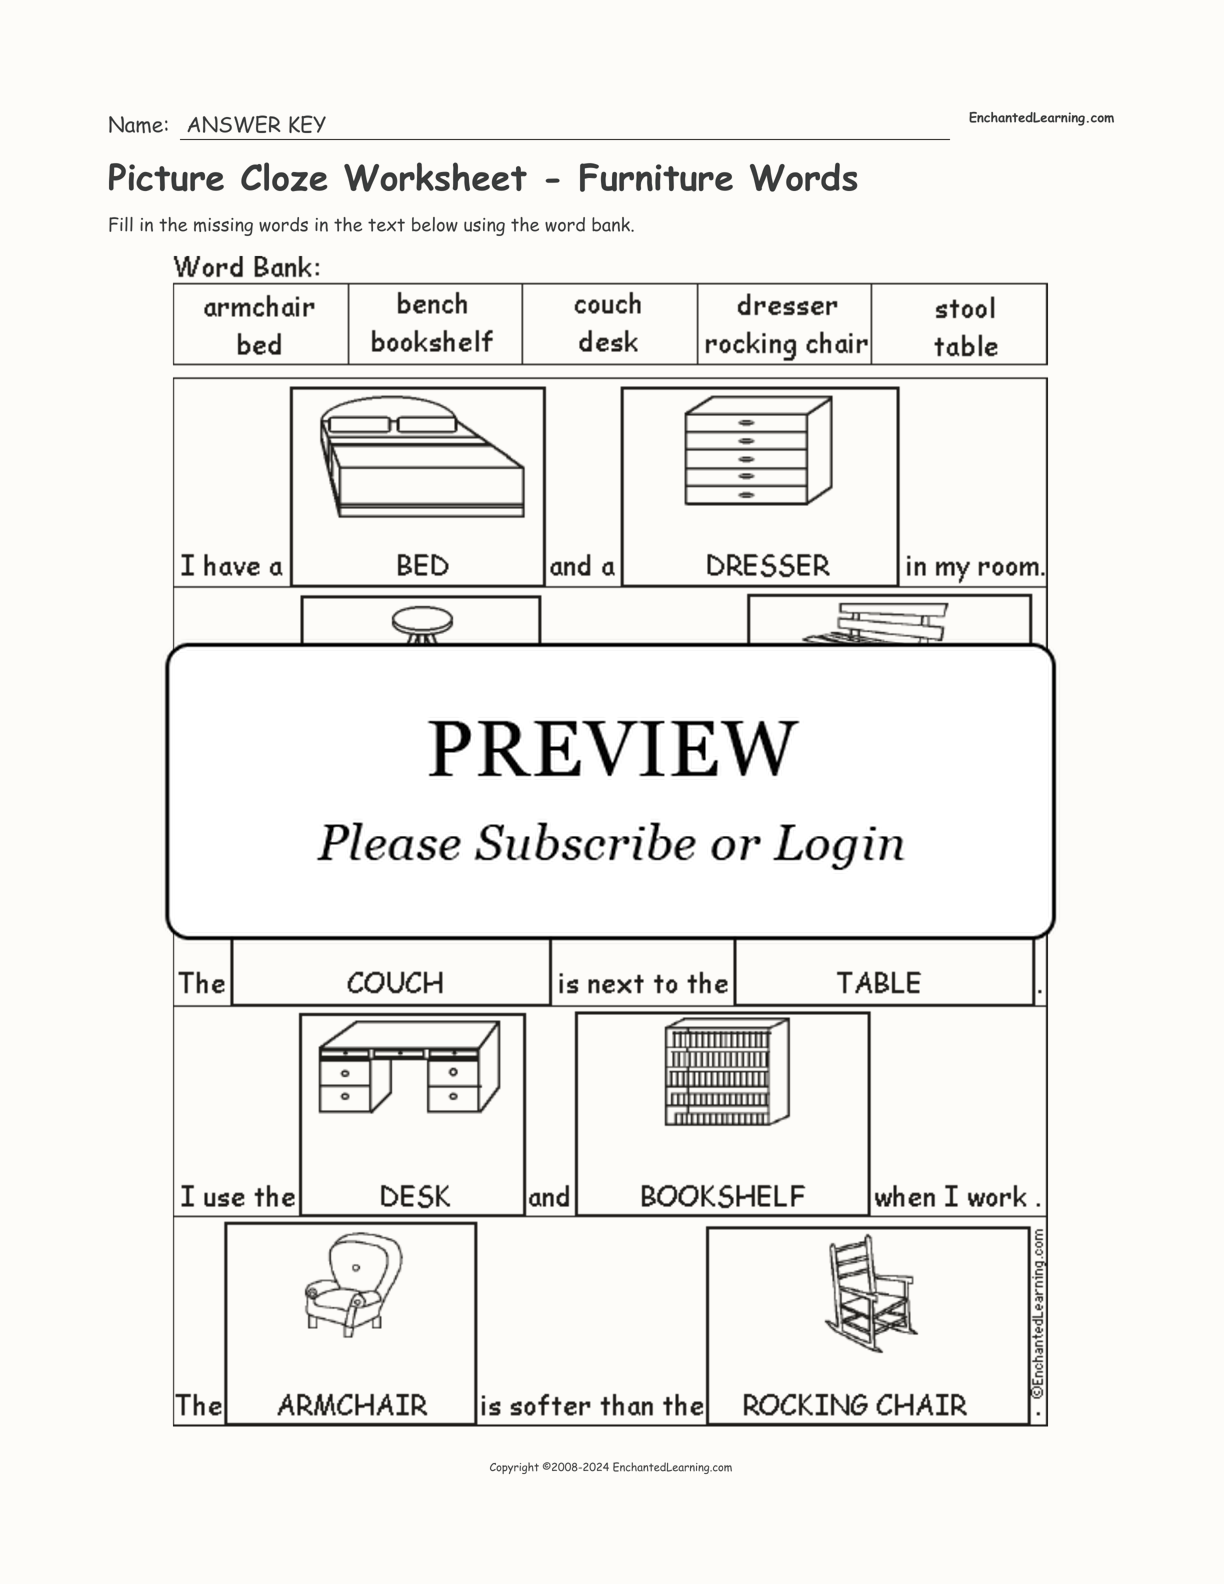 Picture Cloze Worksheet - Furniture Words interactive worksheet page 2